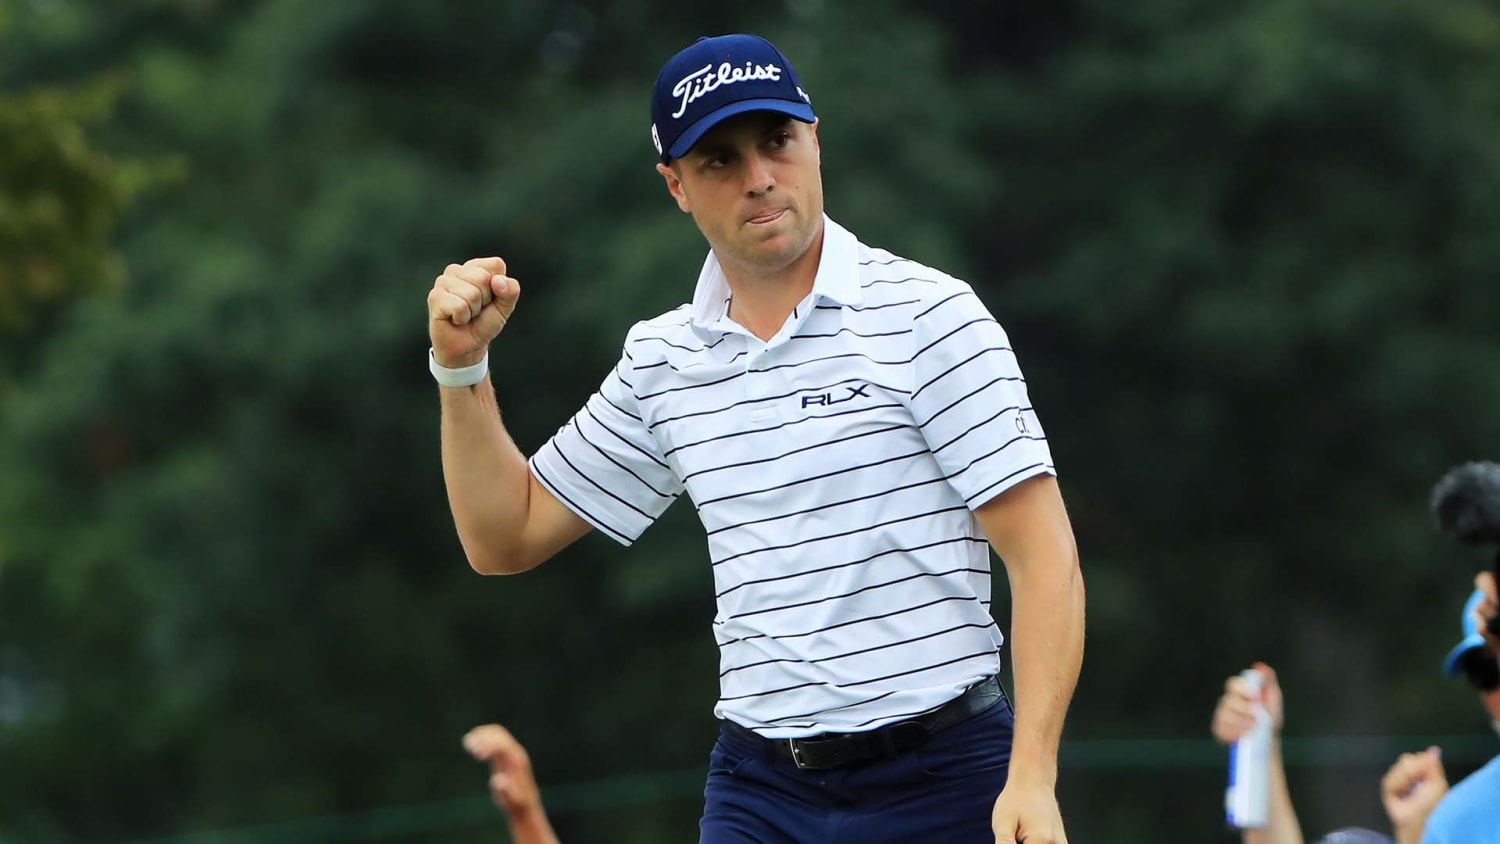 Justin Thomas (61) takes command of BMW as he eyes first victory of season